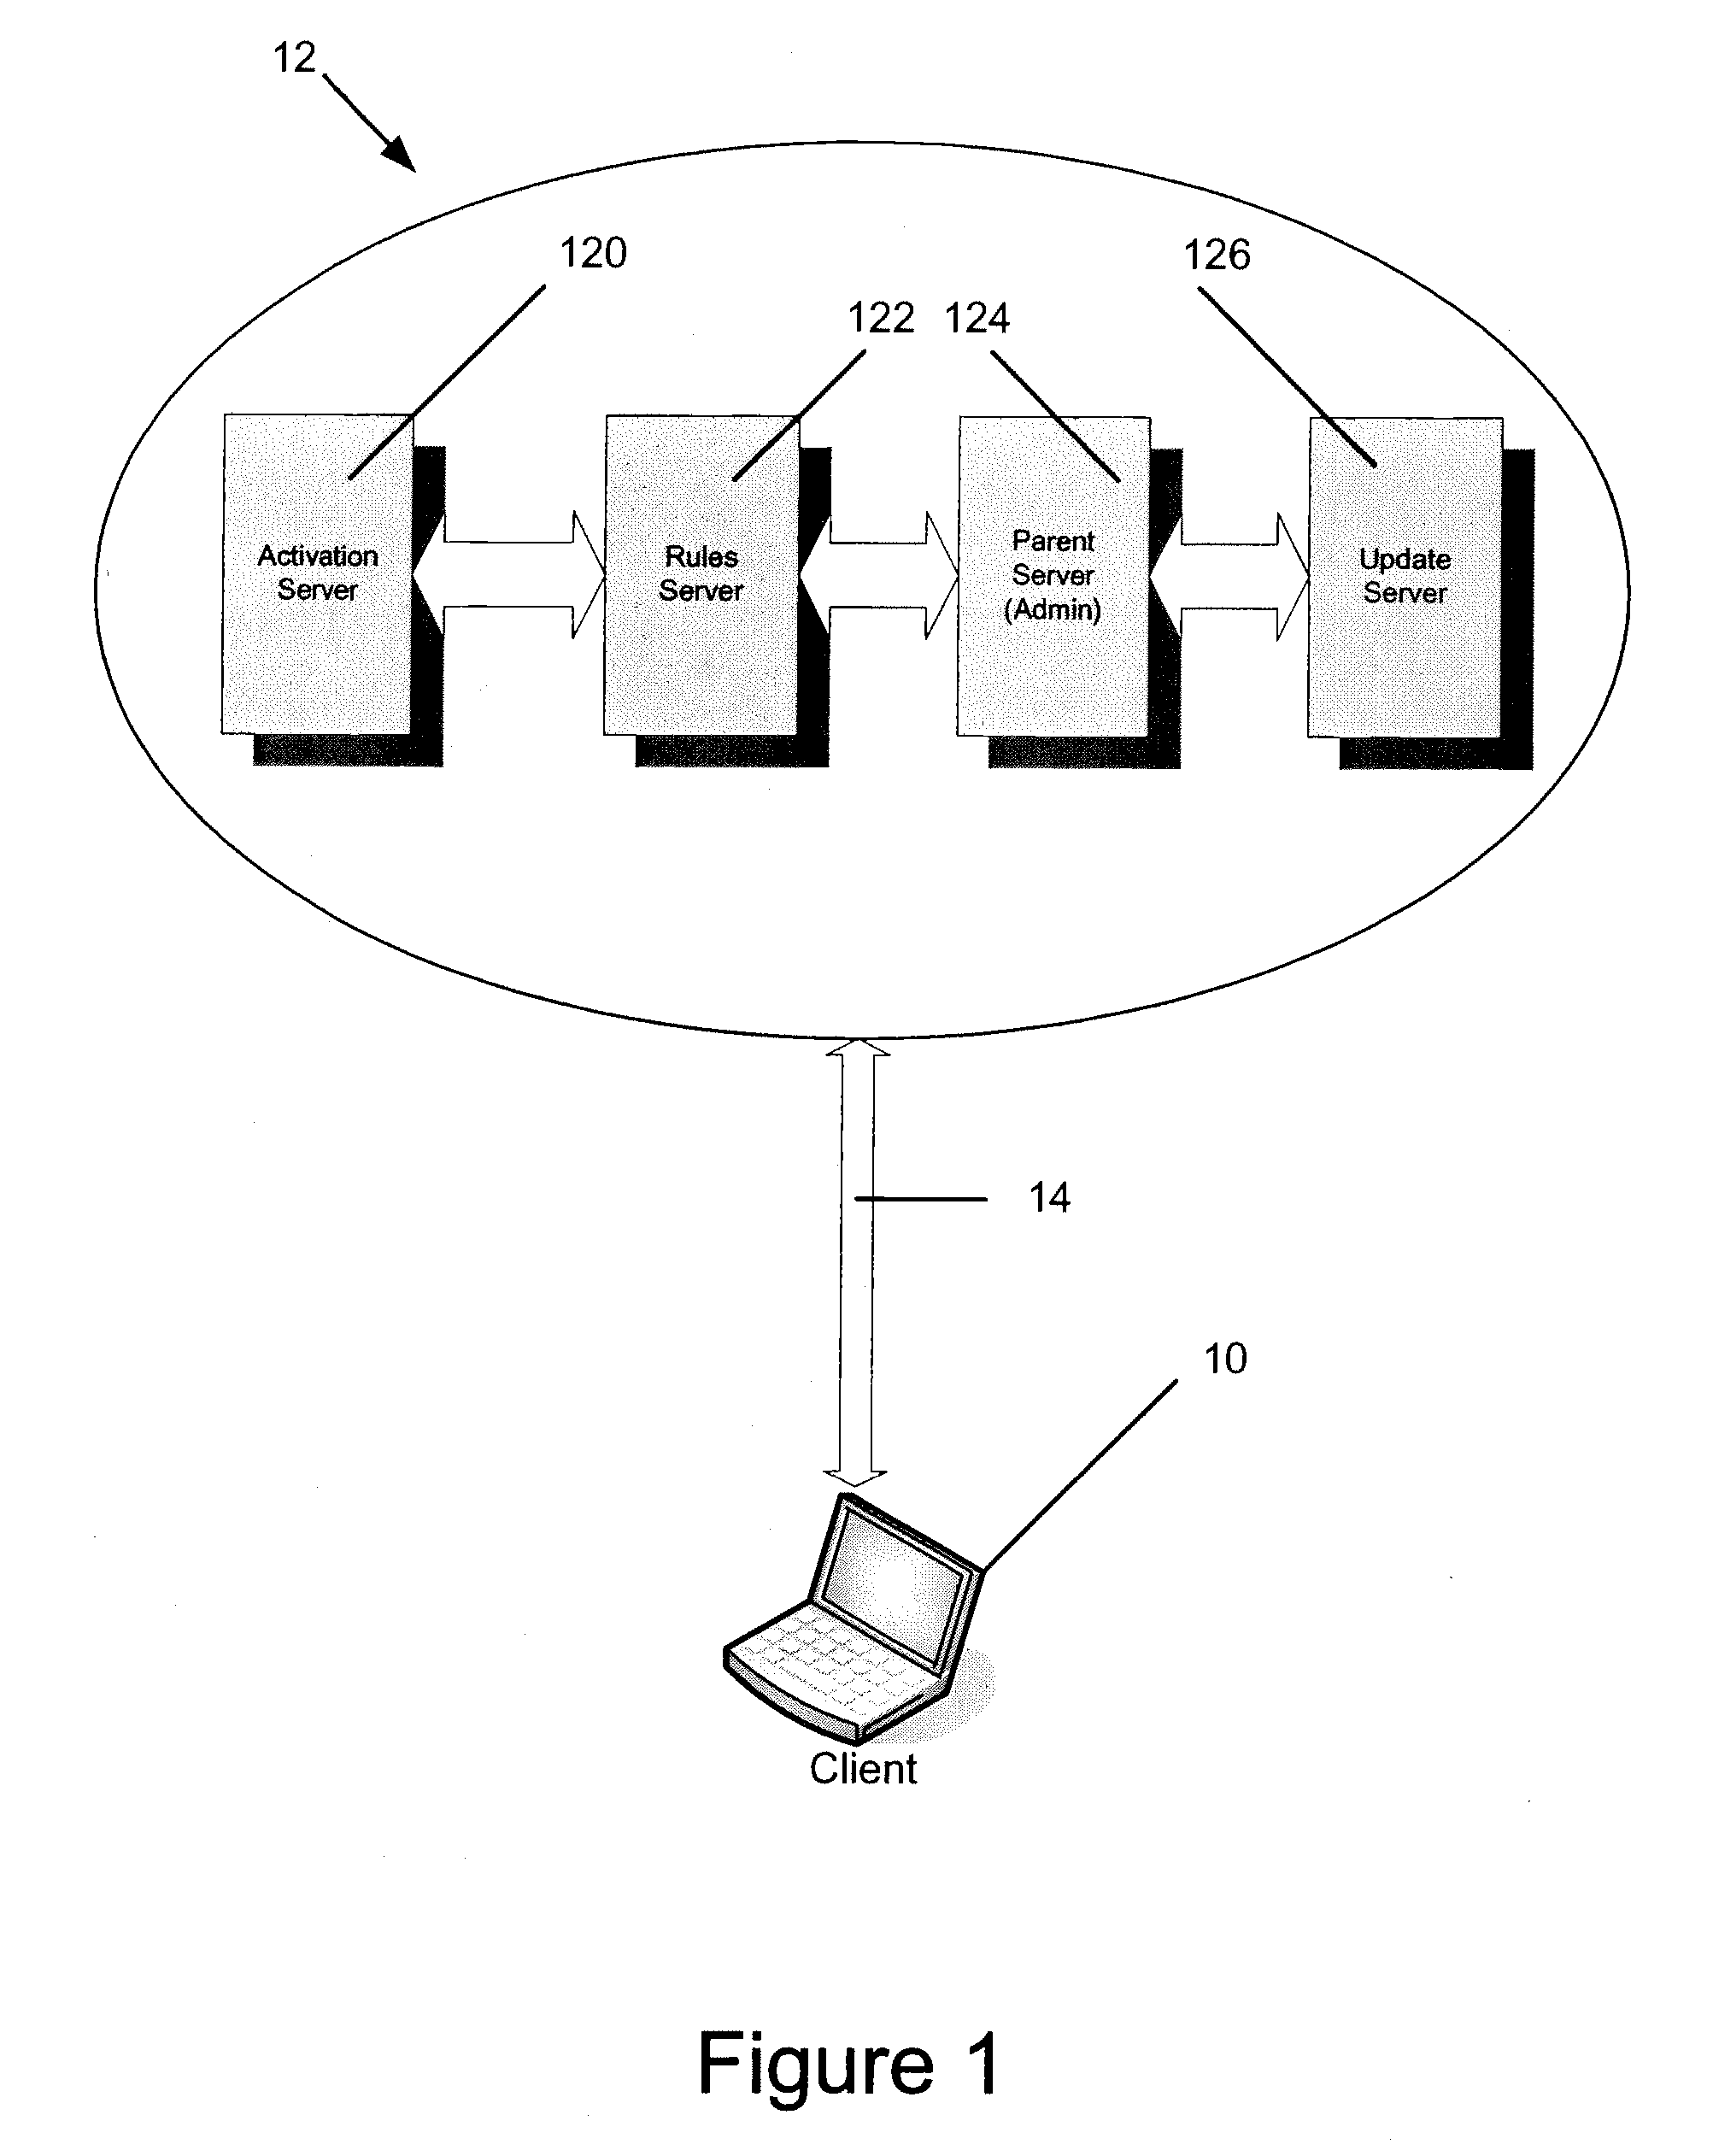 System and method for lost data destruction of electronic data stored on a portable electronic device using a security interval